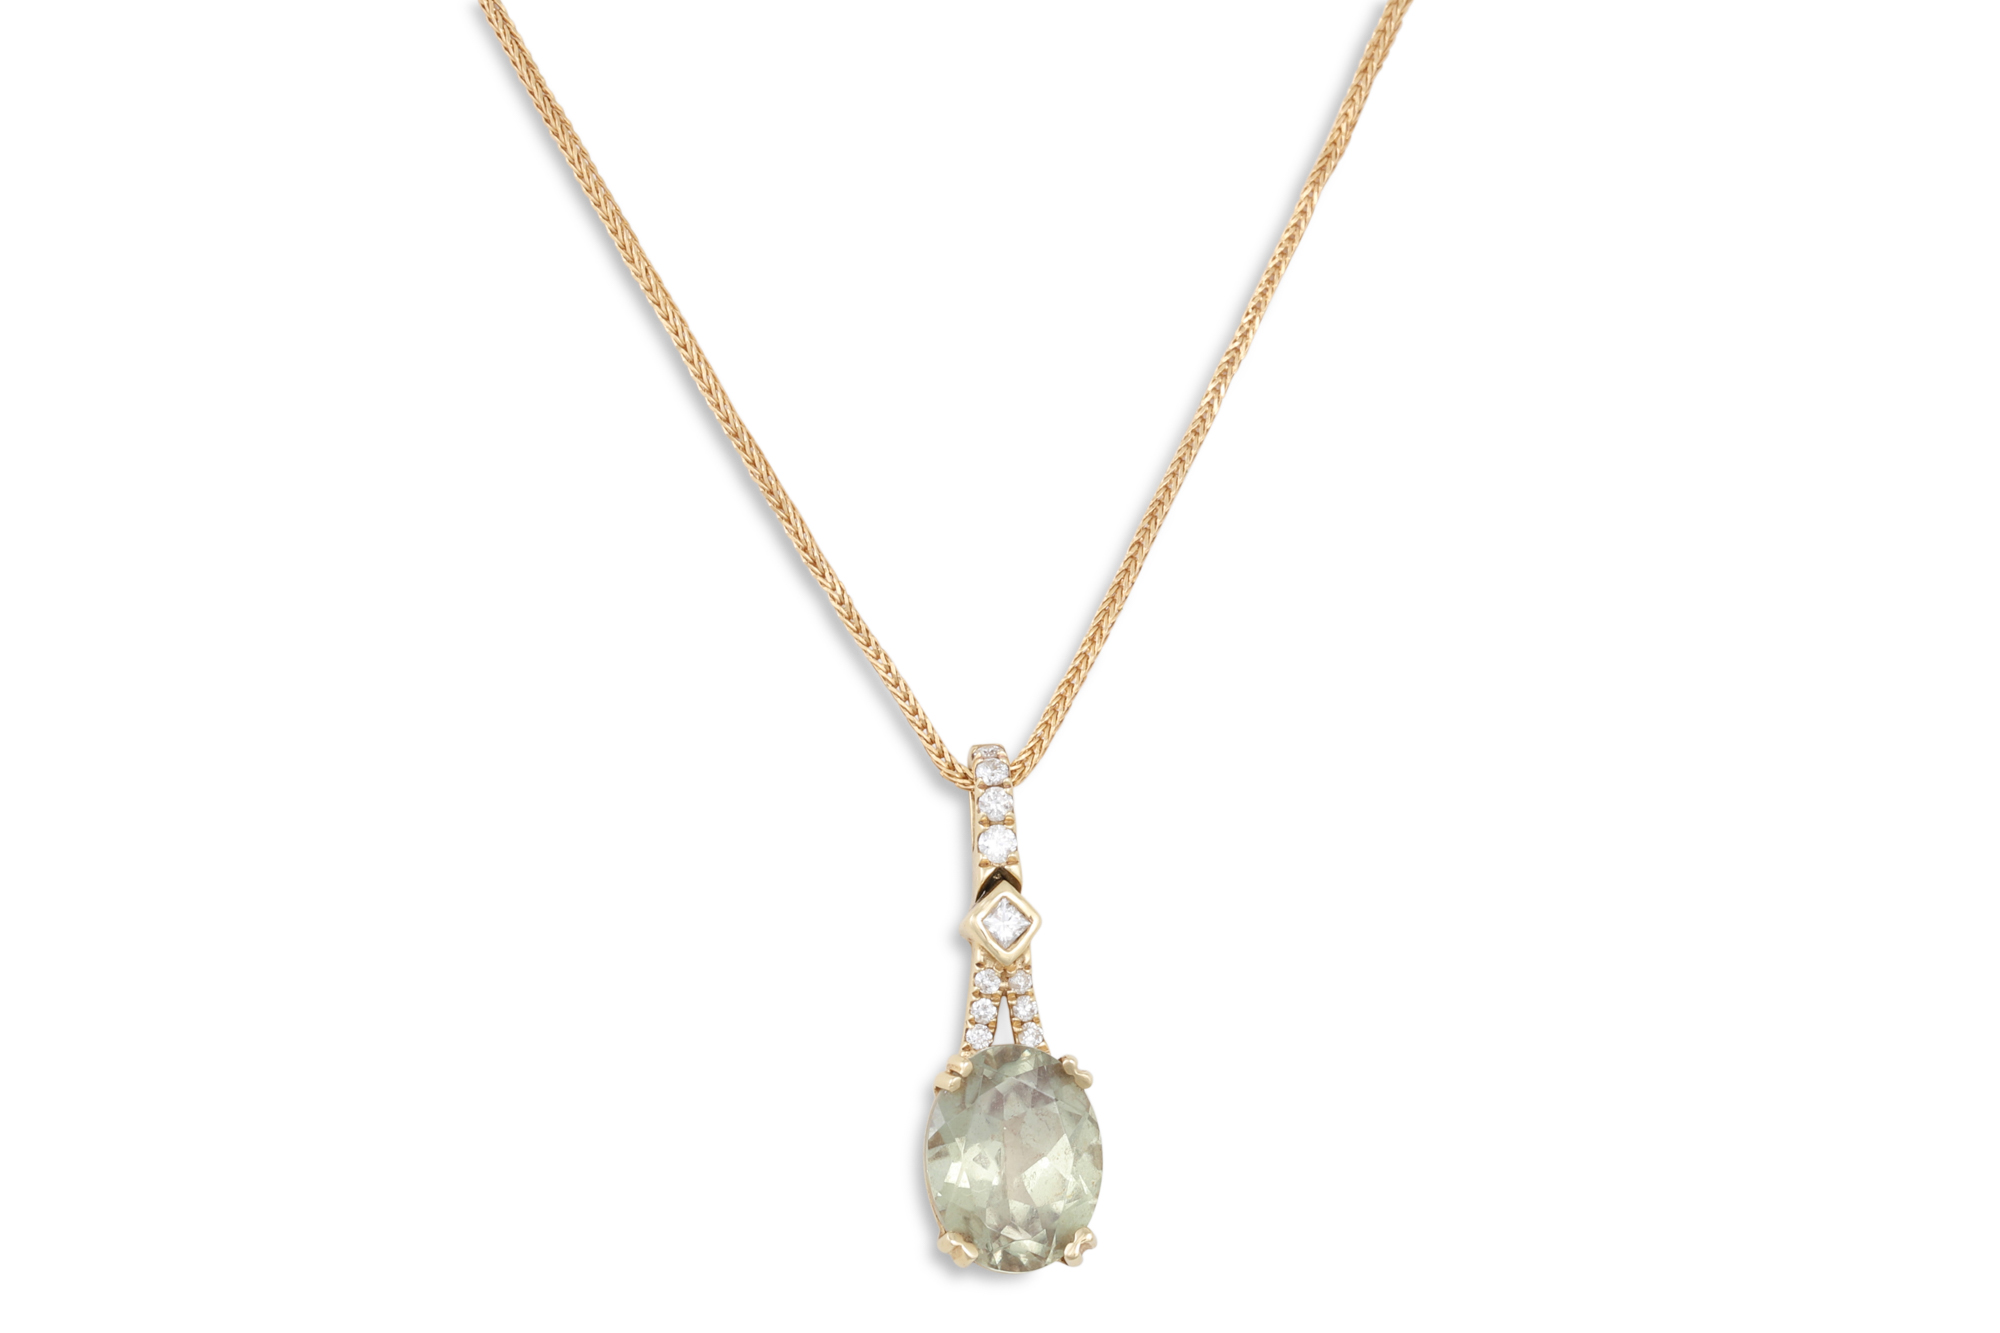 A DIAMOND AND GEM-SET PENDANT, mounted in gold, on an 18ct gold chain